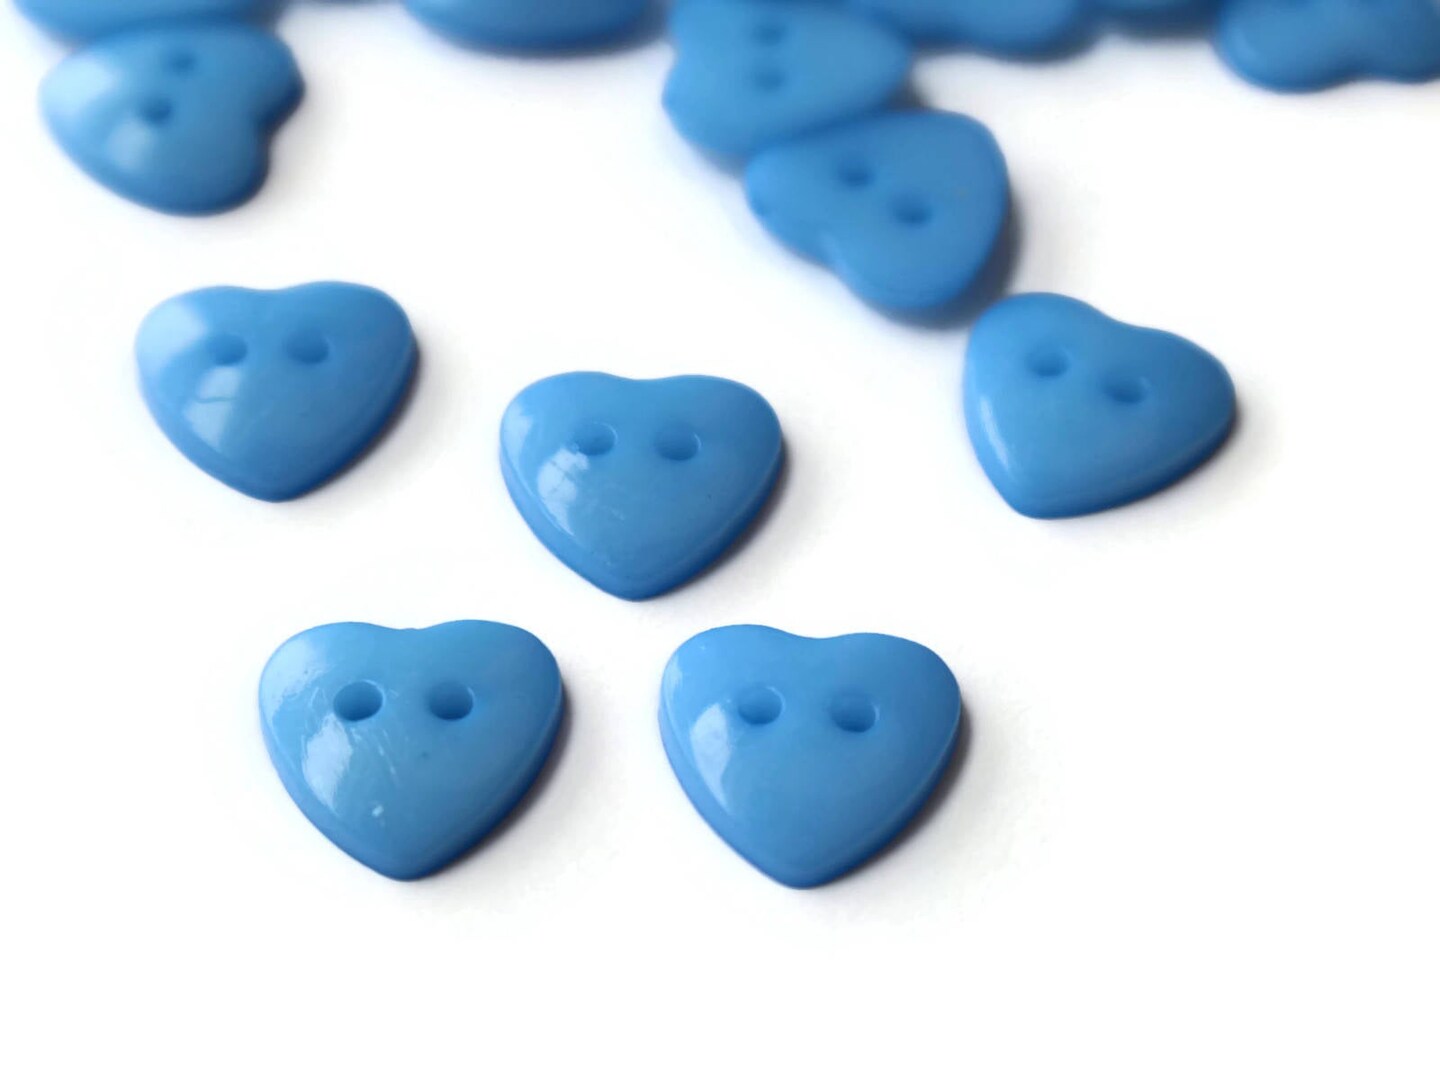 30 14mm Turquoise Heart Buttons Two Hole Plastic Buttons